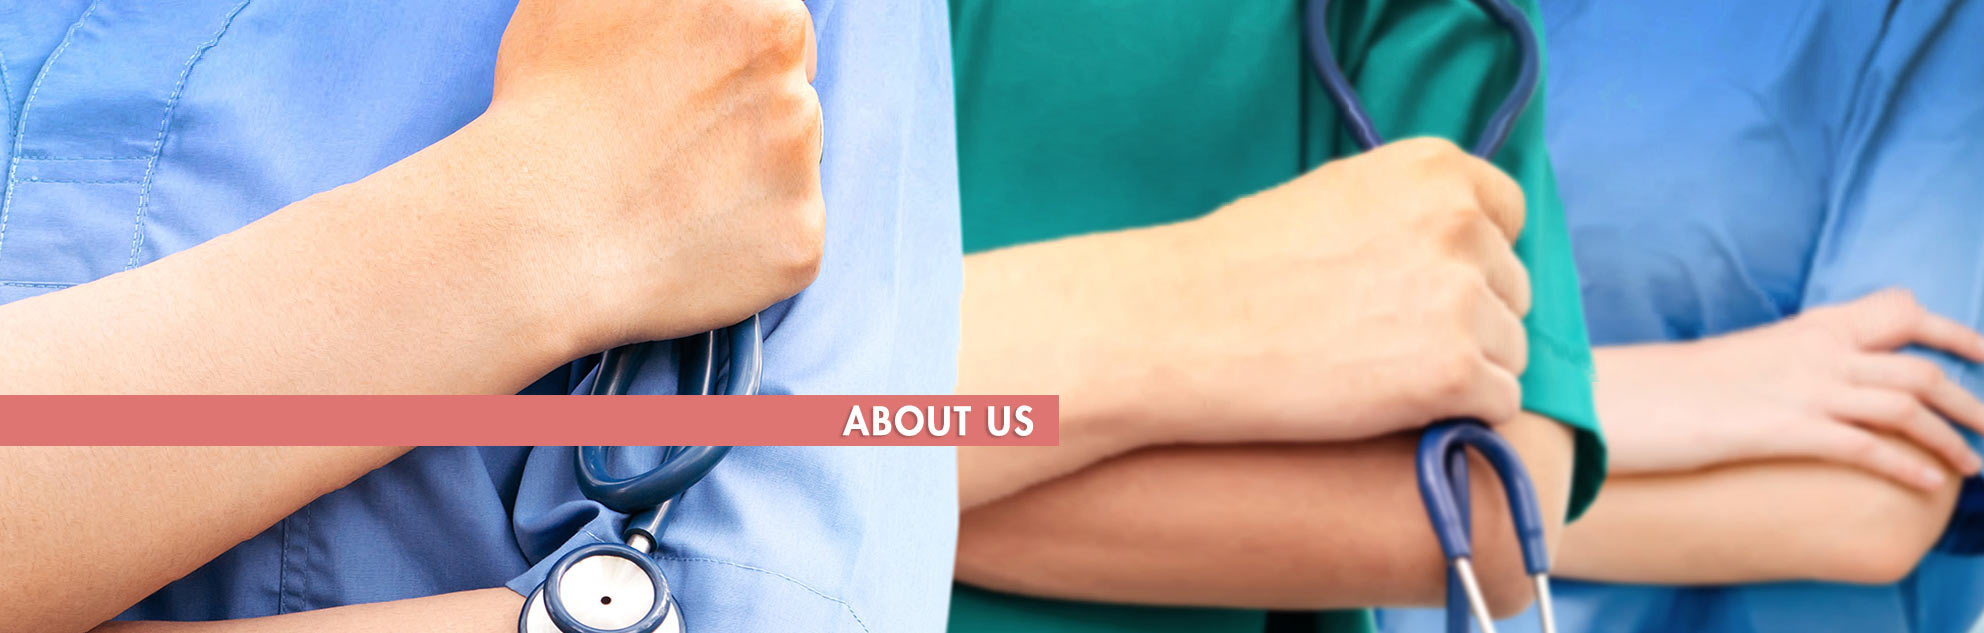 About US - Youniq PLastic Surgery Hyderabad